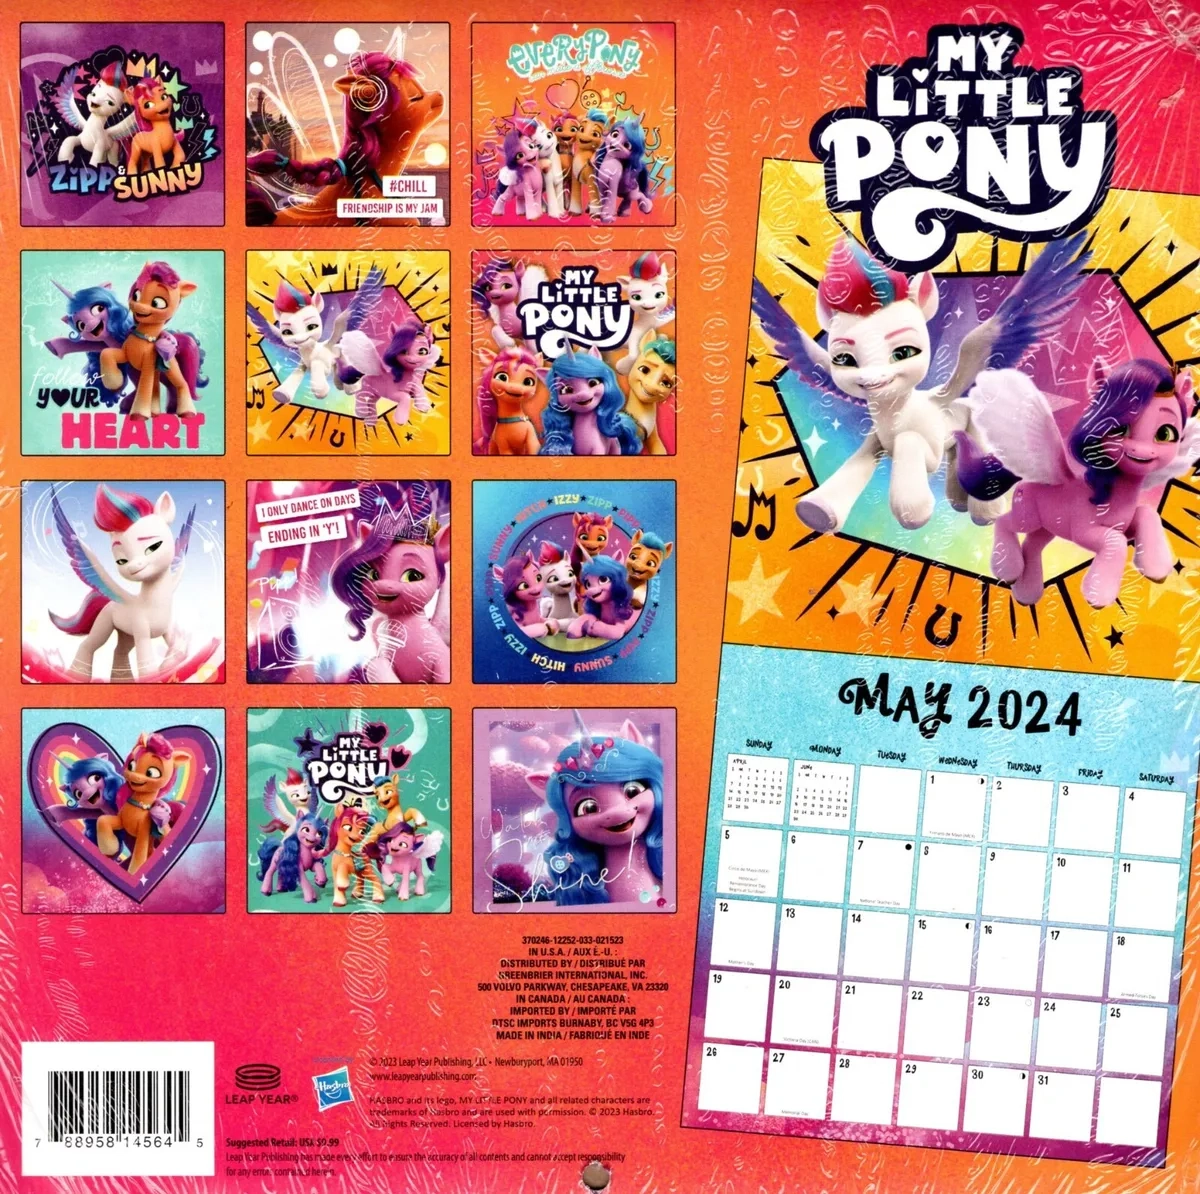 My Little Pony - 16 Month 2024 Wall Calendar throughout Free Printable Calendar 2024 My Little Pony